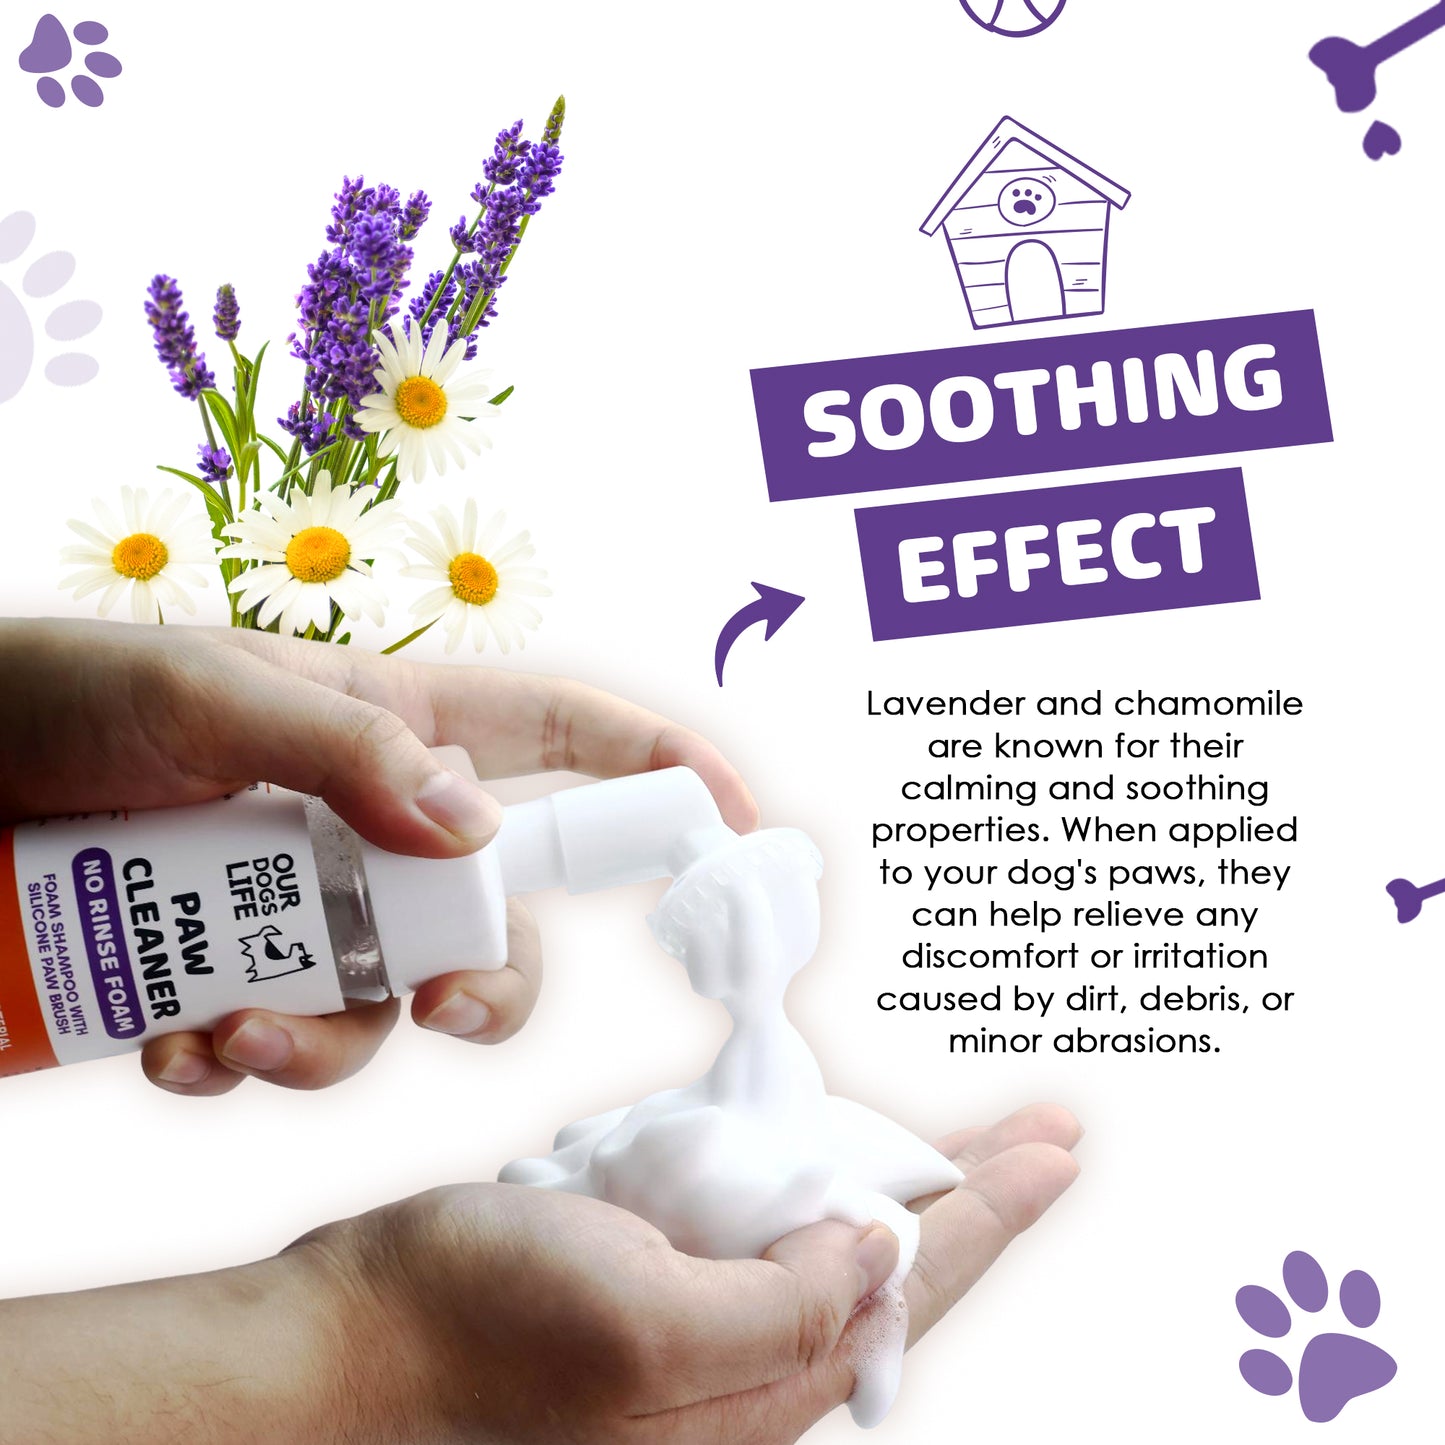 Paw Cleaner Shampoo With Towel